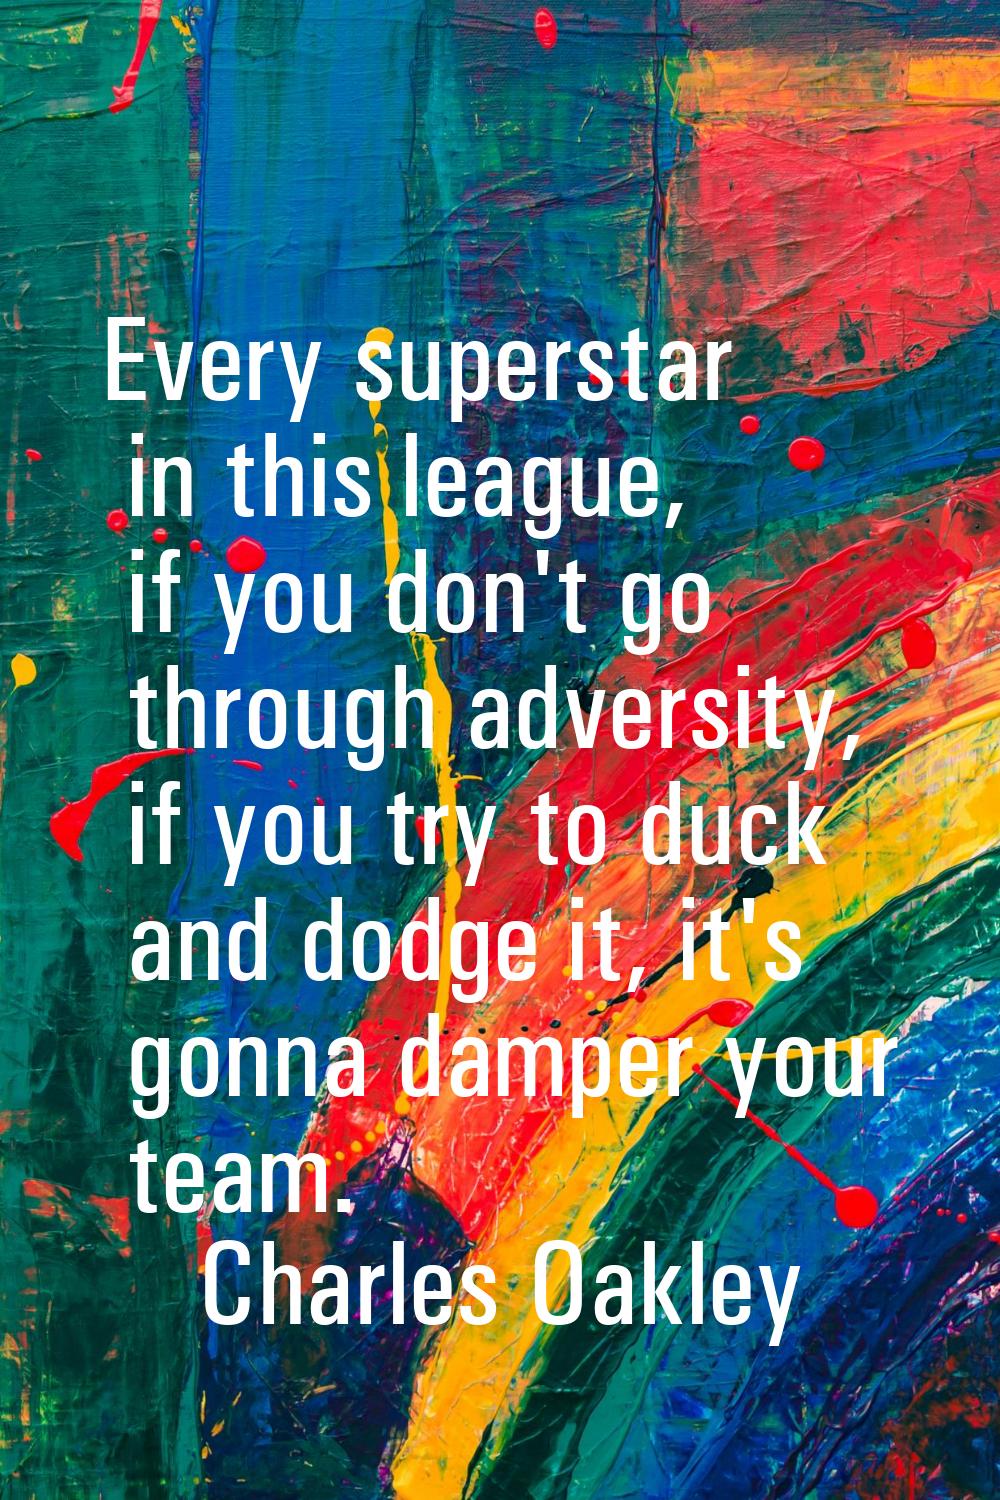 Every superstar in this league, if you don't go through adversity, if you try to duck and dodge it,